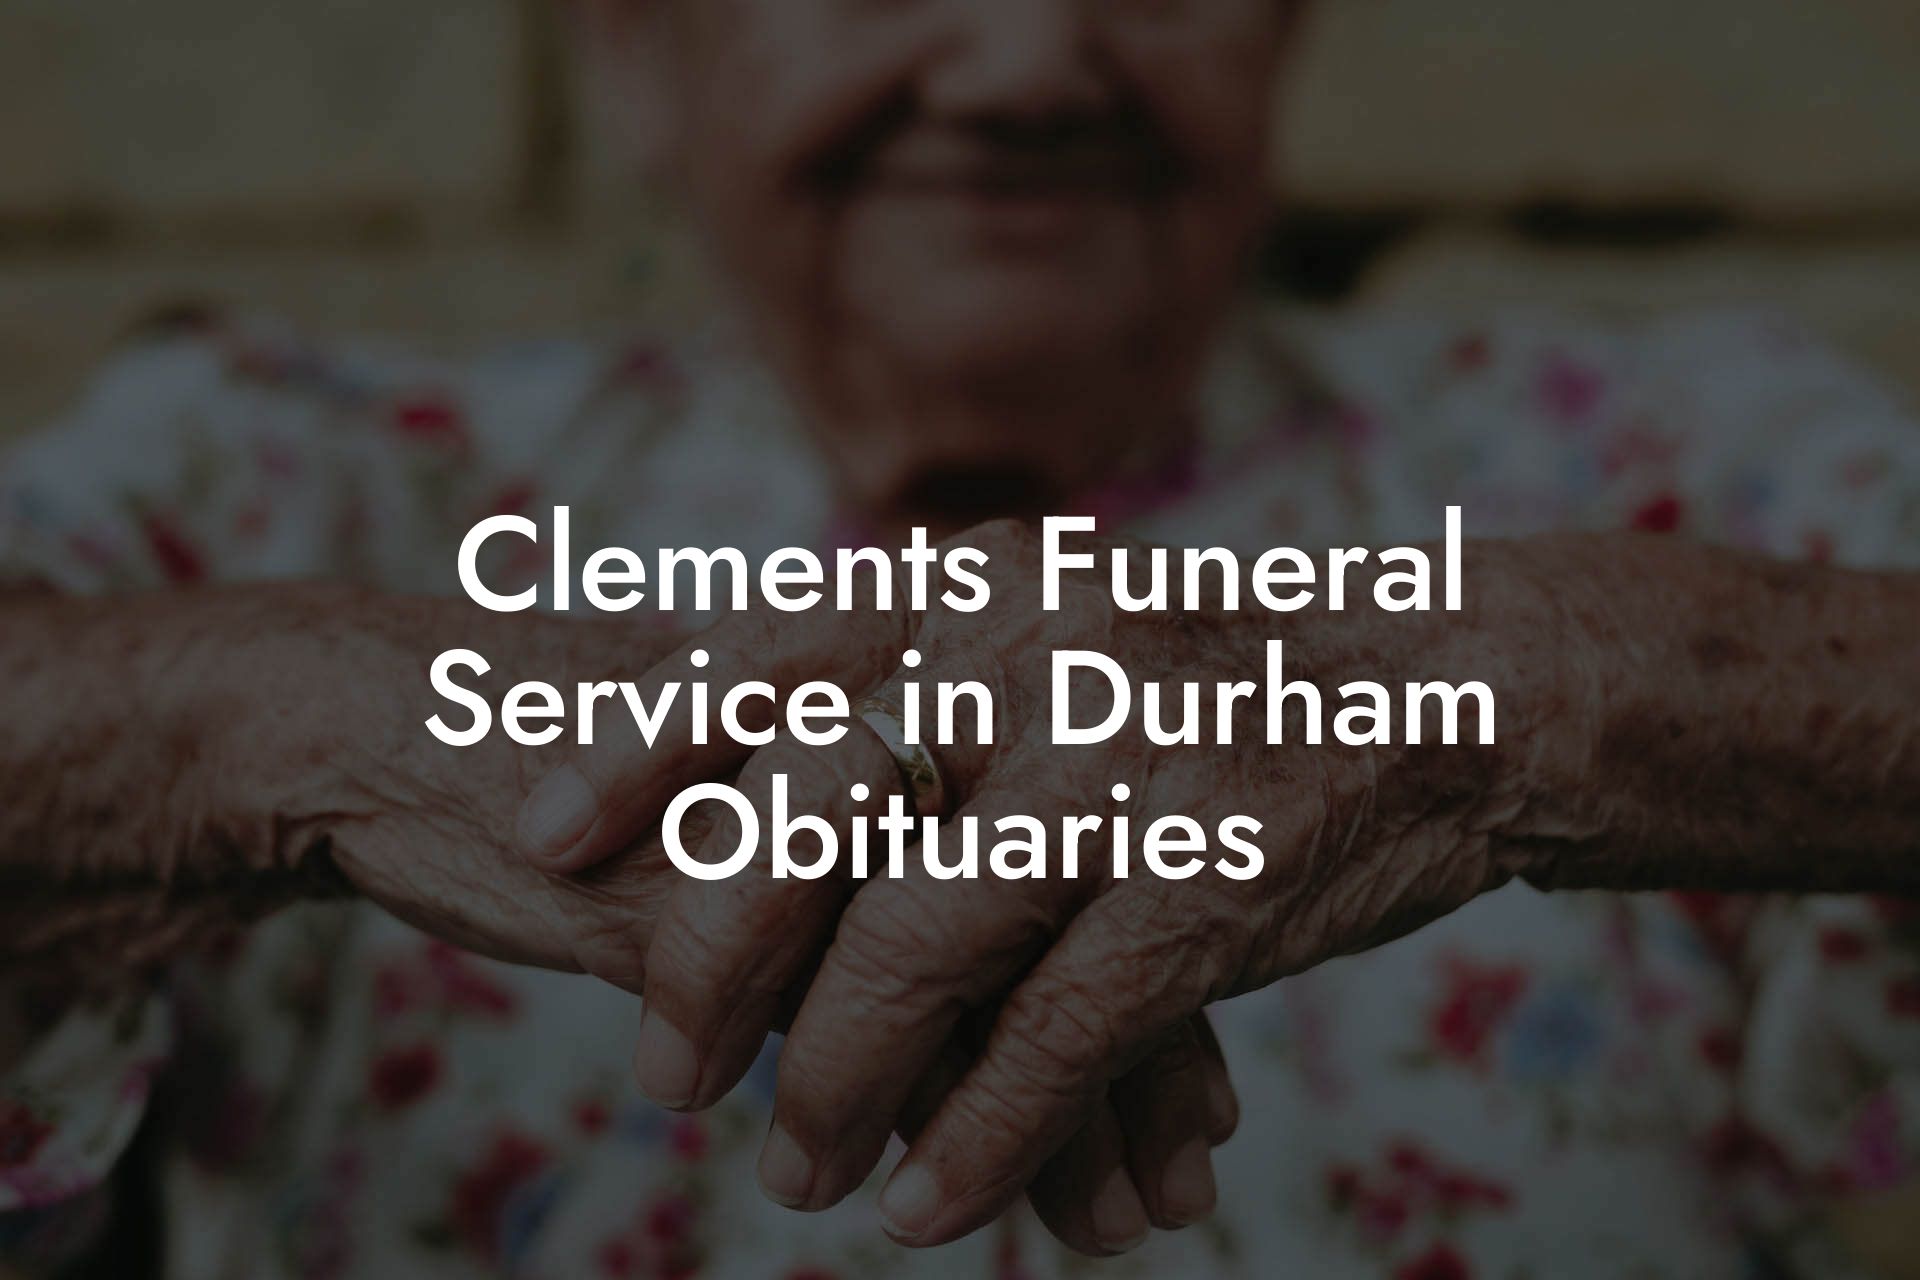 Clements Funeral Service in Durham Obituaries